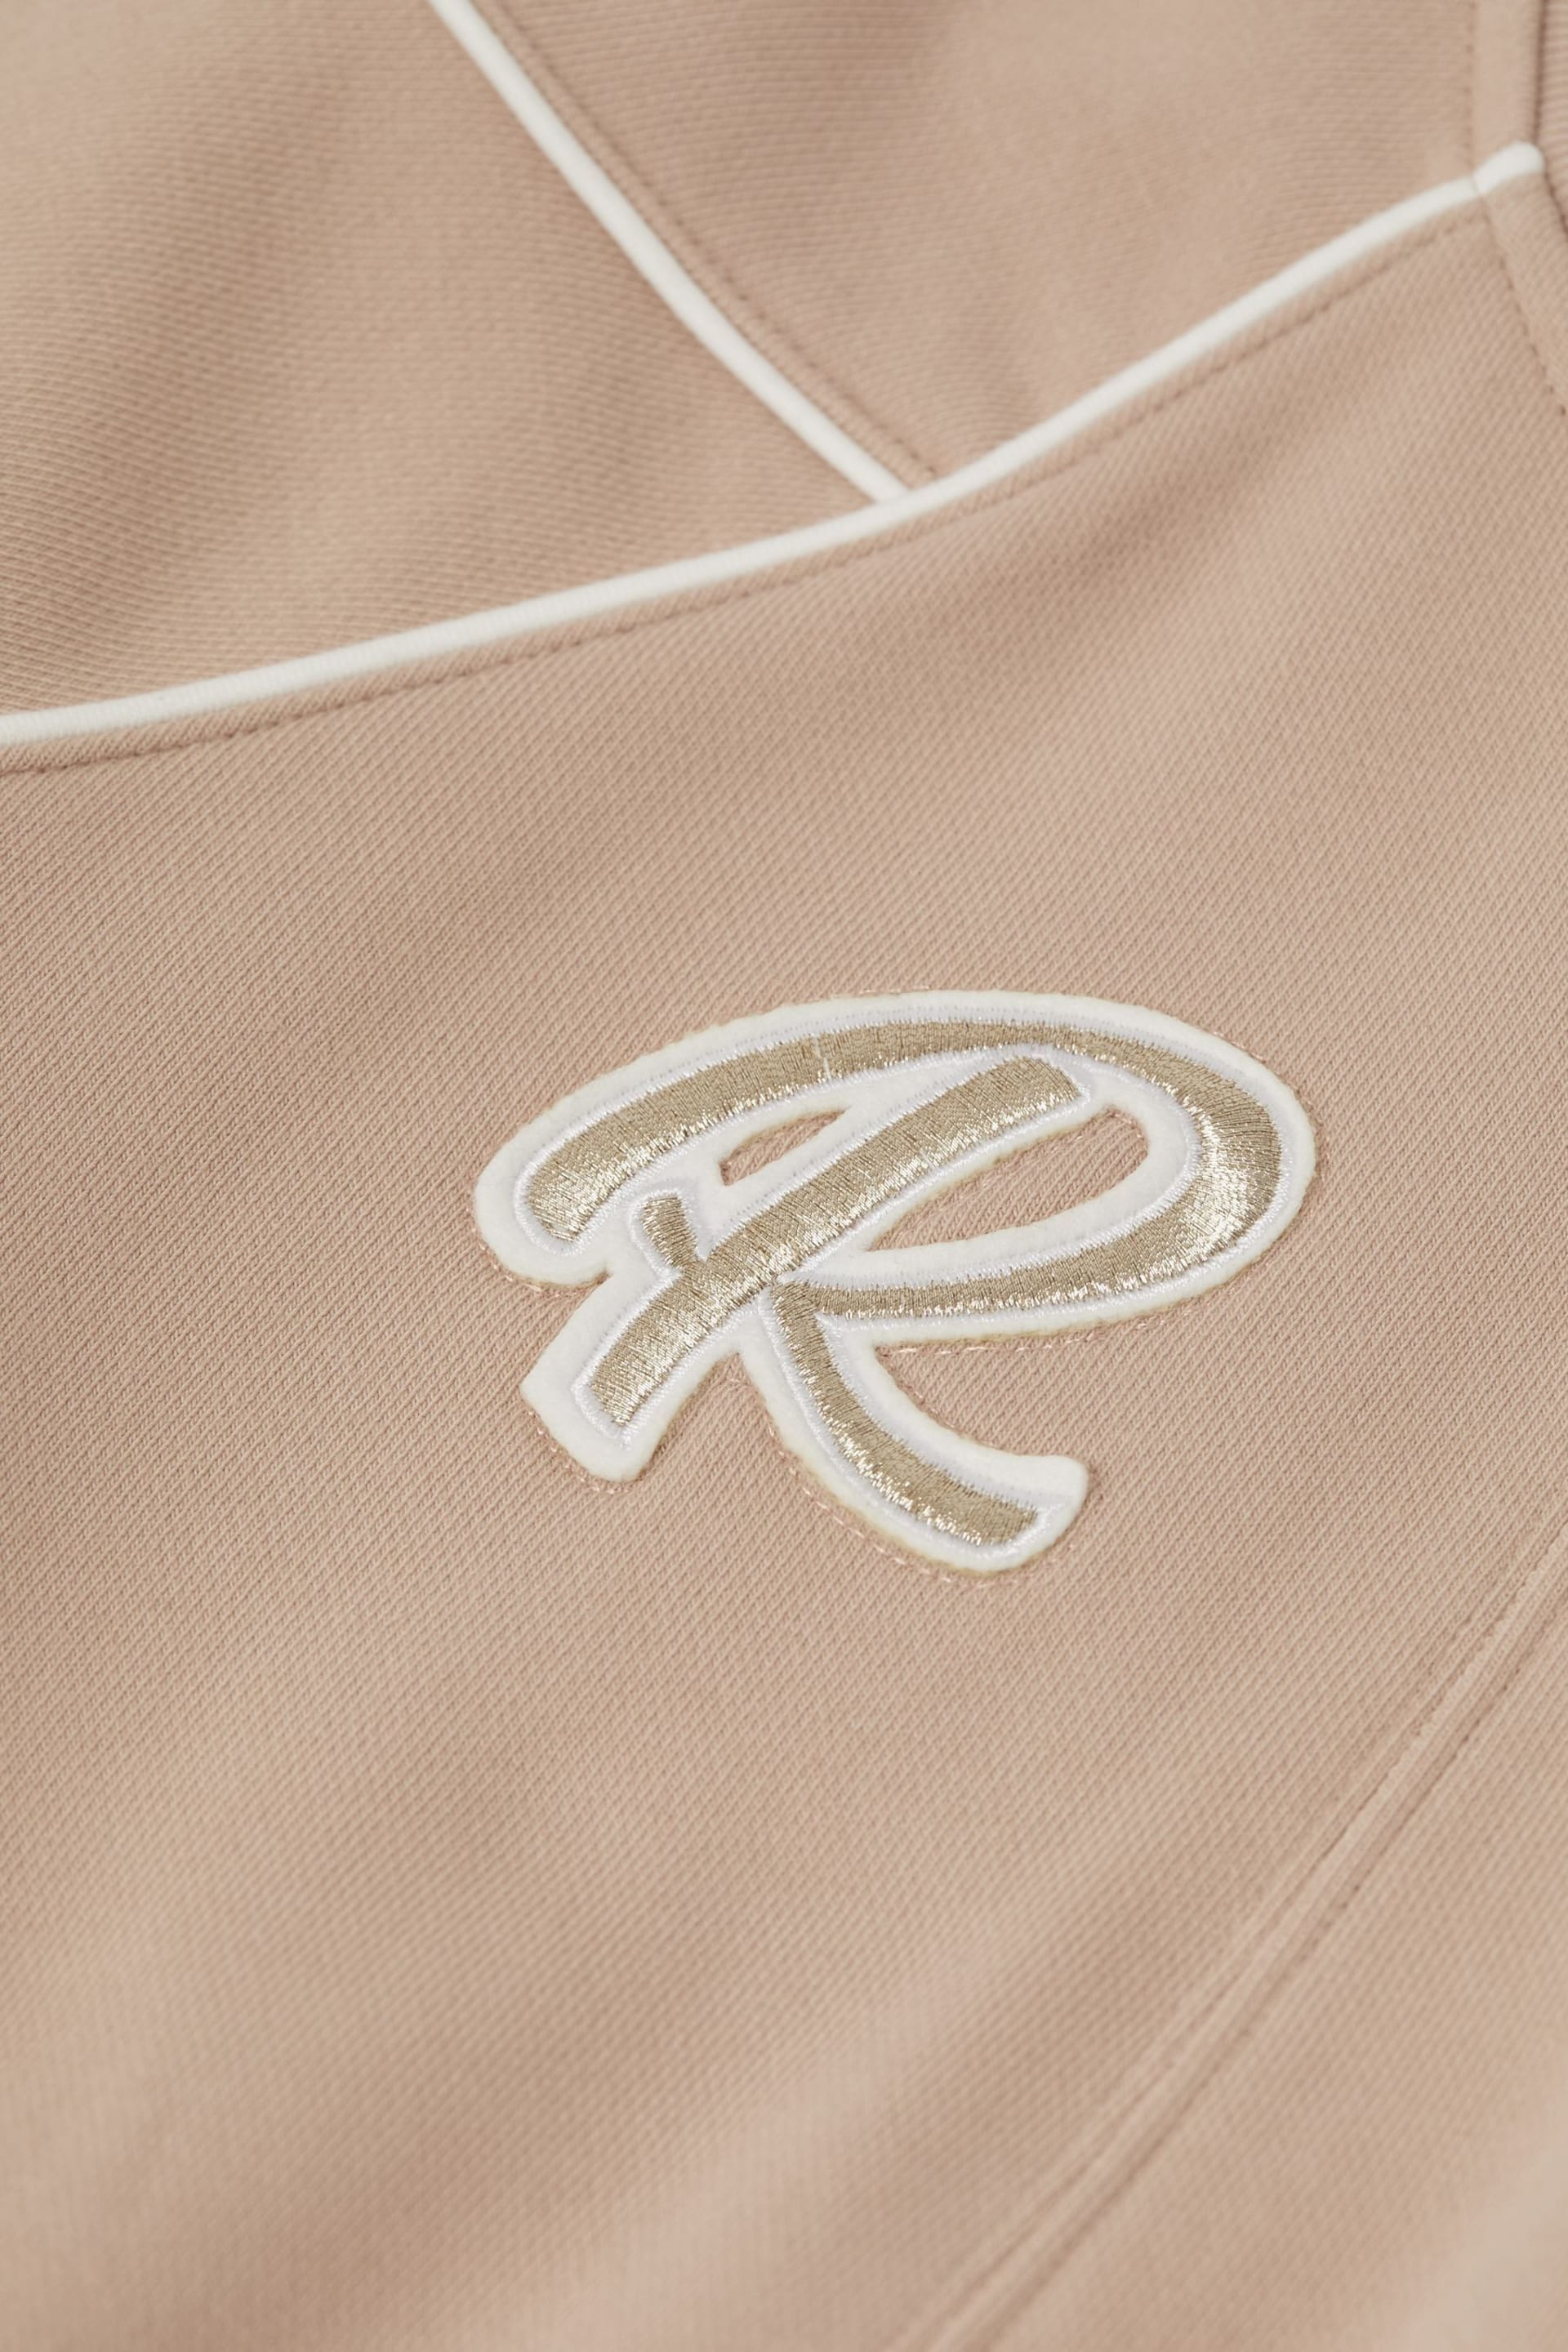 Reiss Camel Jona Junior Embroidered Jersey Dress - Image 5 of 5